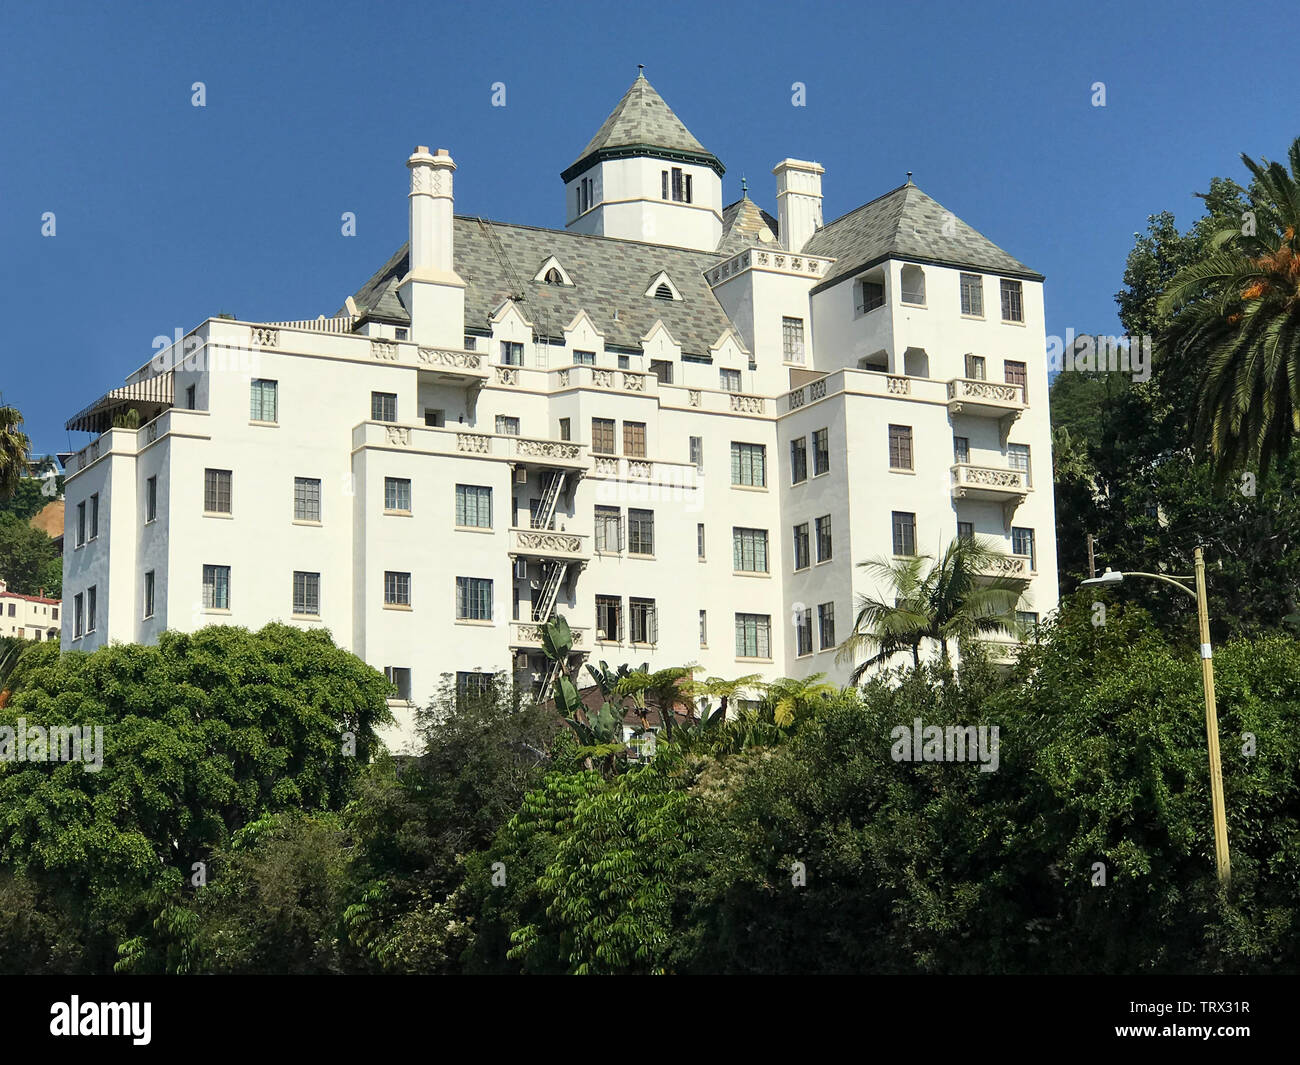 The historic Chateau Marmont Hotel on the Sunset Strip, Los Angeles, CA  Stock Photo - Alamy